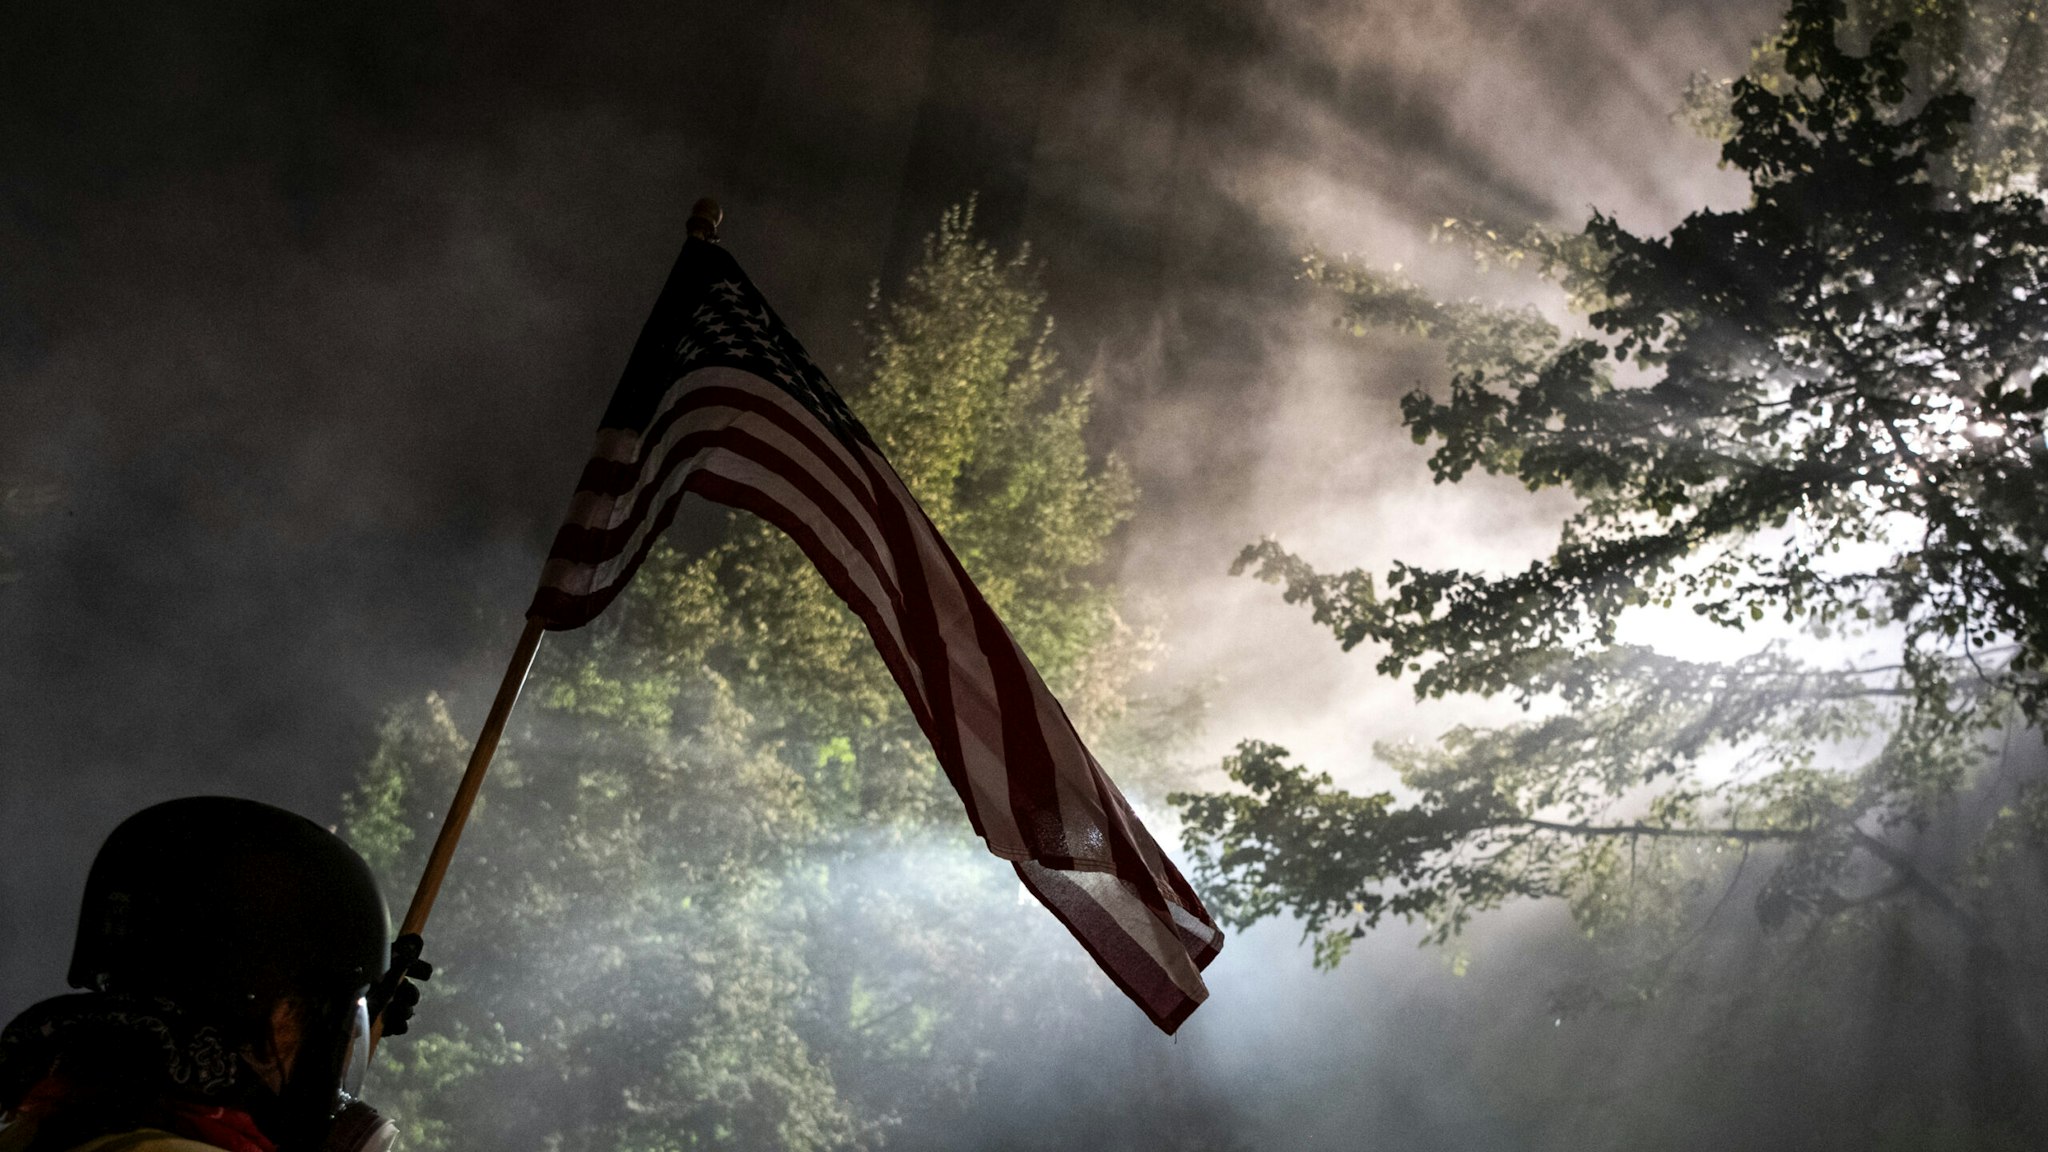 A demonstrators holding a US flag stands in a cloud of tear gas outside the Mark O. Hatfield Federal Courthouse during a night of protest against racial injustice, police brutality and the deployment of federal troops to US cities on July 29, 2020 in Portland, Oregon. - Protests in the US city of Portland have continued for more than 60 days. President Donald Trump's administration on July 29 agreed to a deal to defuse weeks of clashes with the withdrawal of federal forces whose presence enraged protesters, but the timing remained in dispute. (Photo by Alisha JUCEVIC / AFP) (Photo by ALISHA JUCEVIC/AFP via Getty Images)